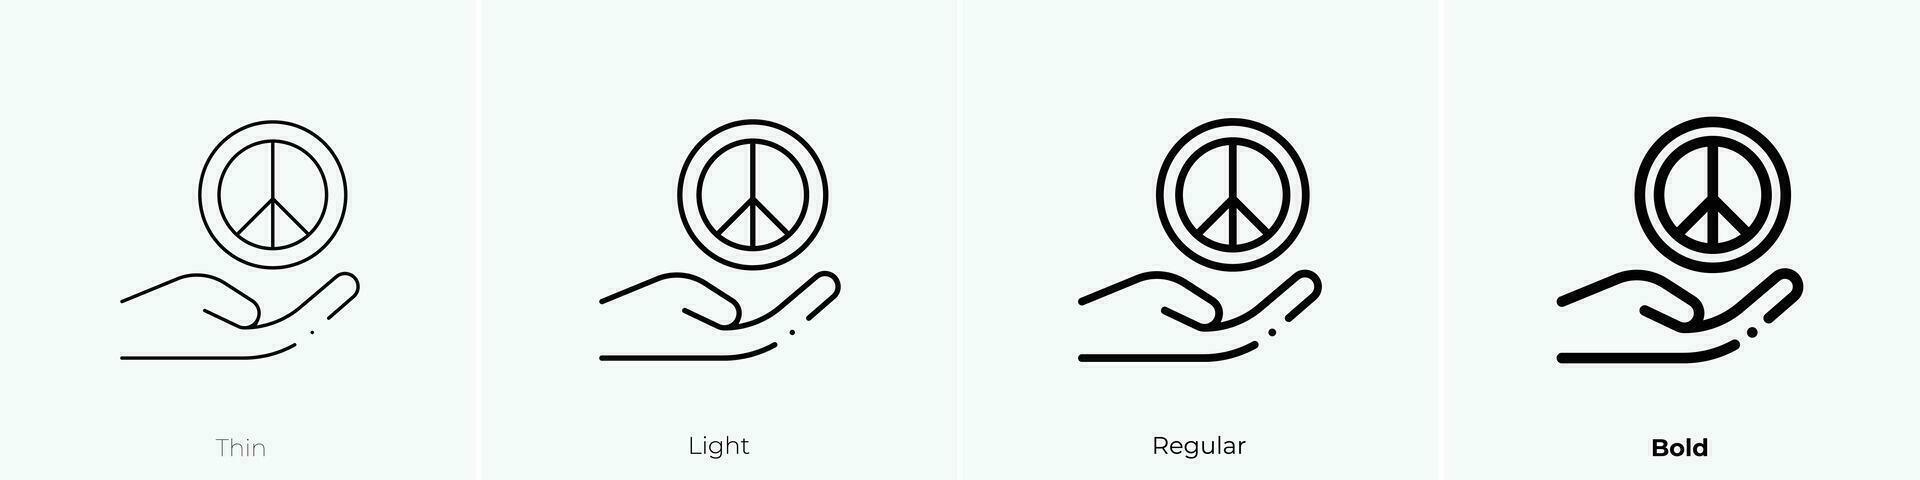 peace symbol icon. Thin, Light, Regular And Bold style design isolated on white background vector